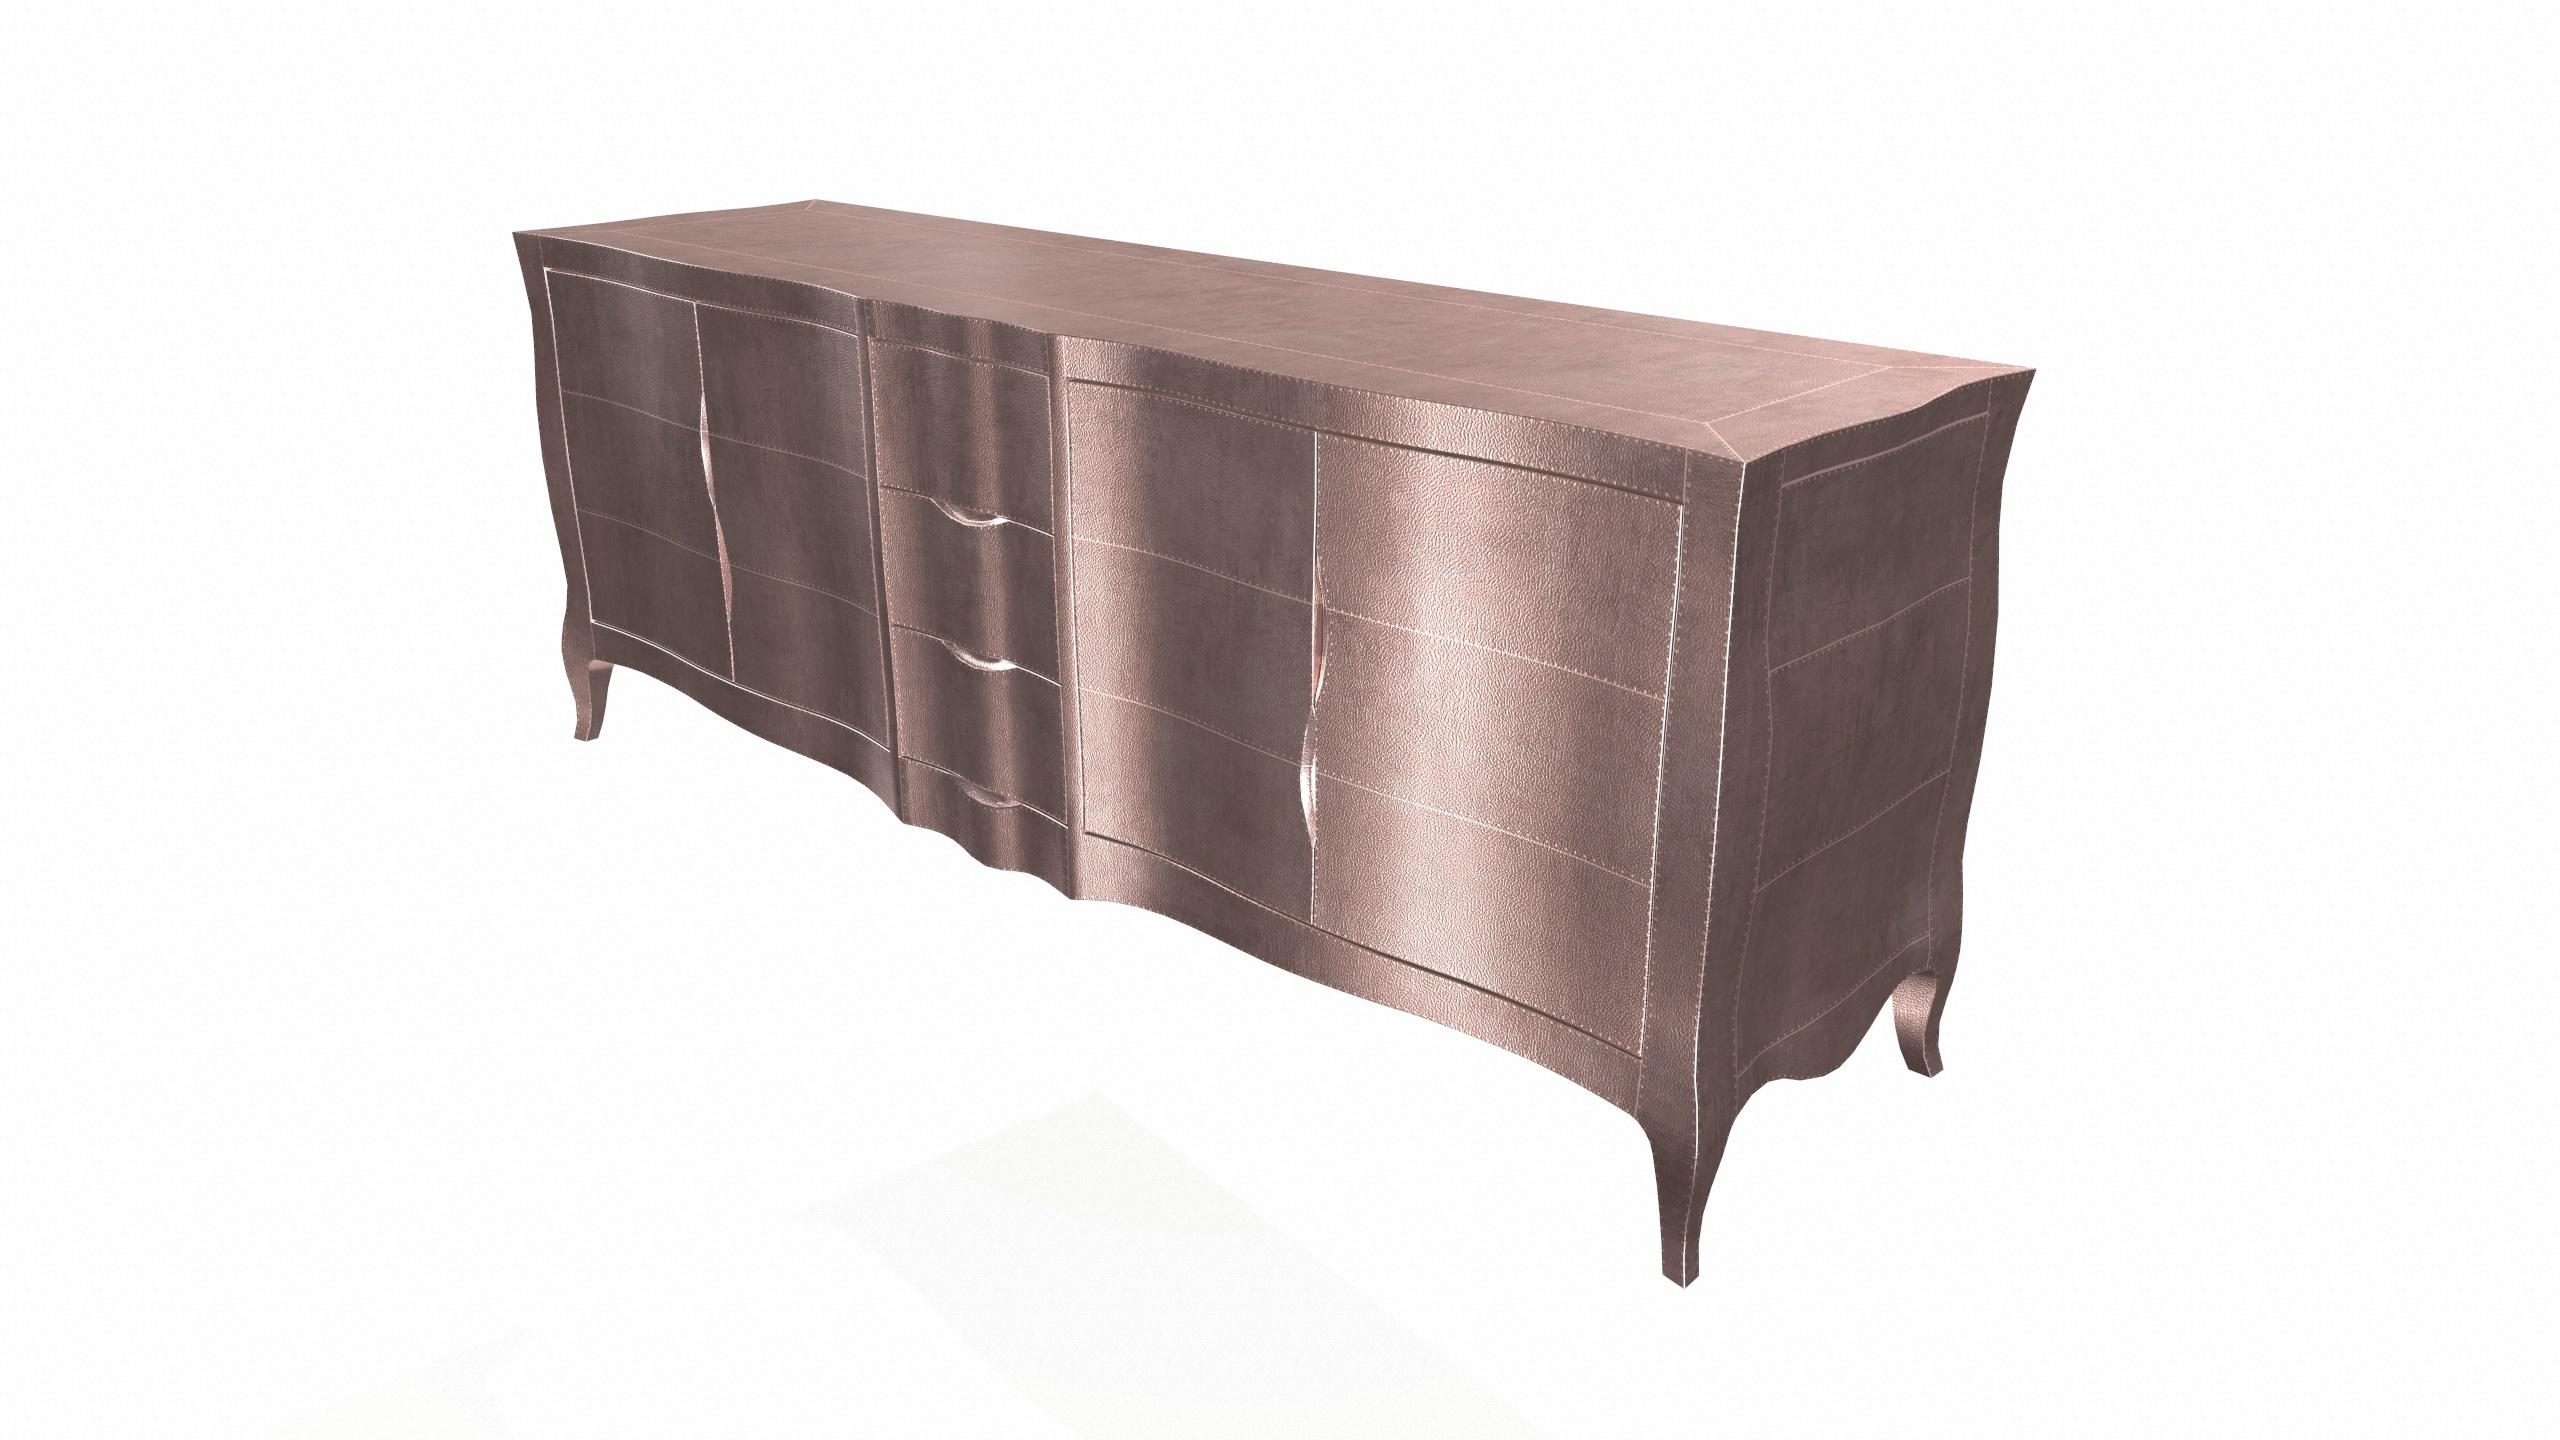 American Louise Credenza Art Deco Cupboards in Fine Hammered Copper by Paul Mathieu For Sale